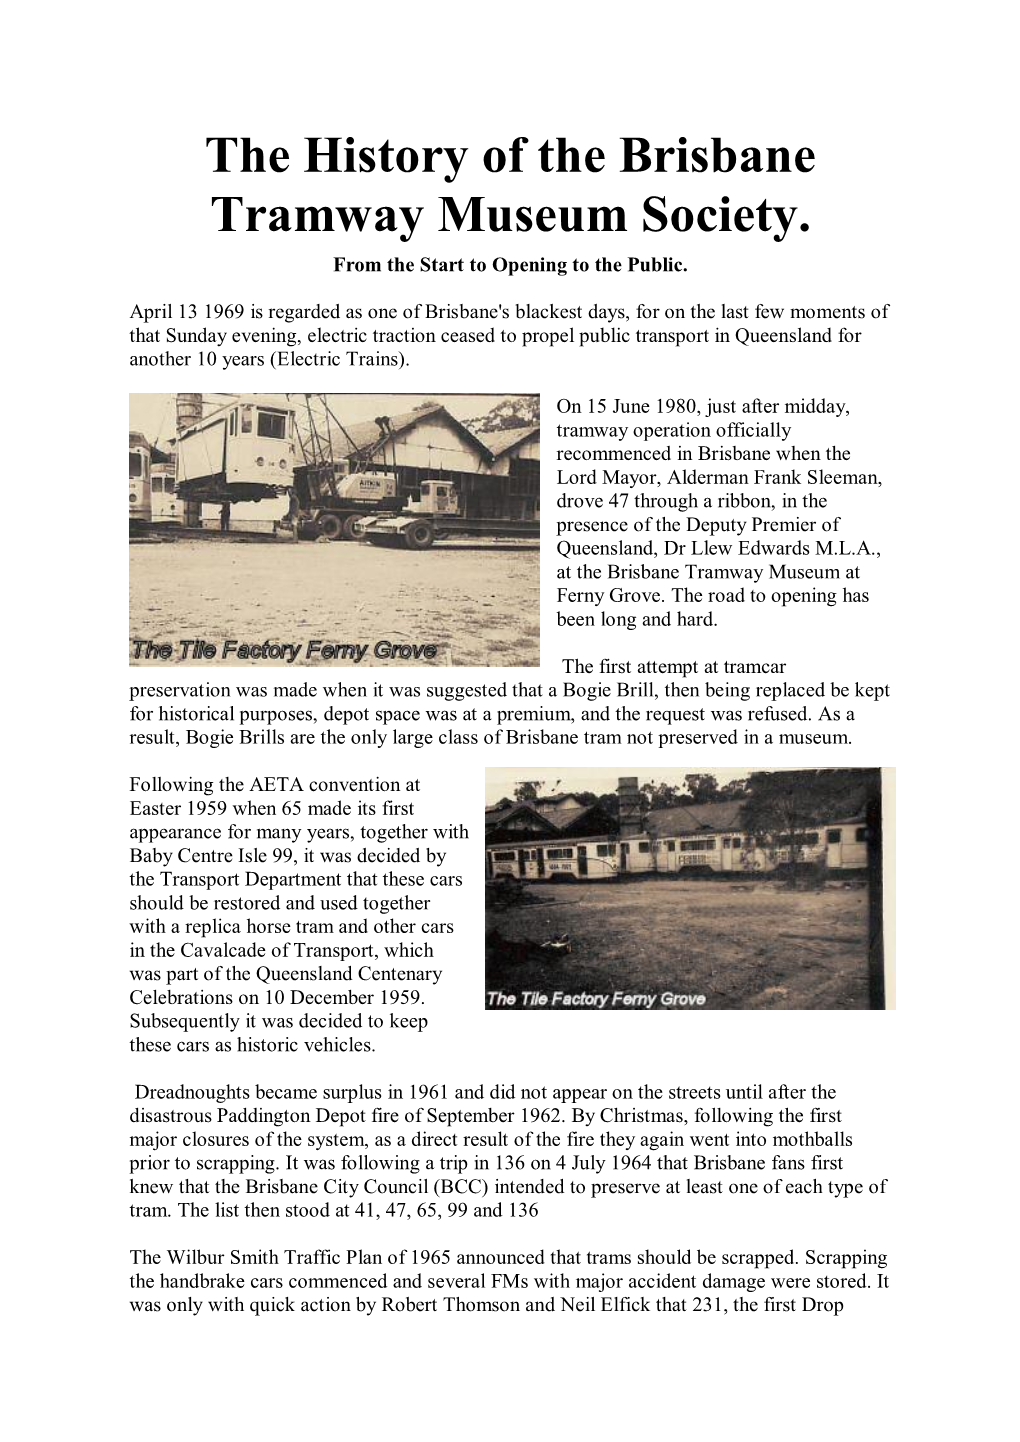 The History of the Brisbane Tramway Museum Society. from the Start to Opening to the Public